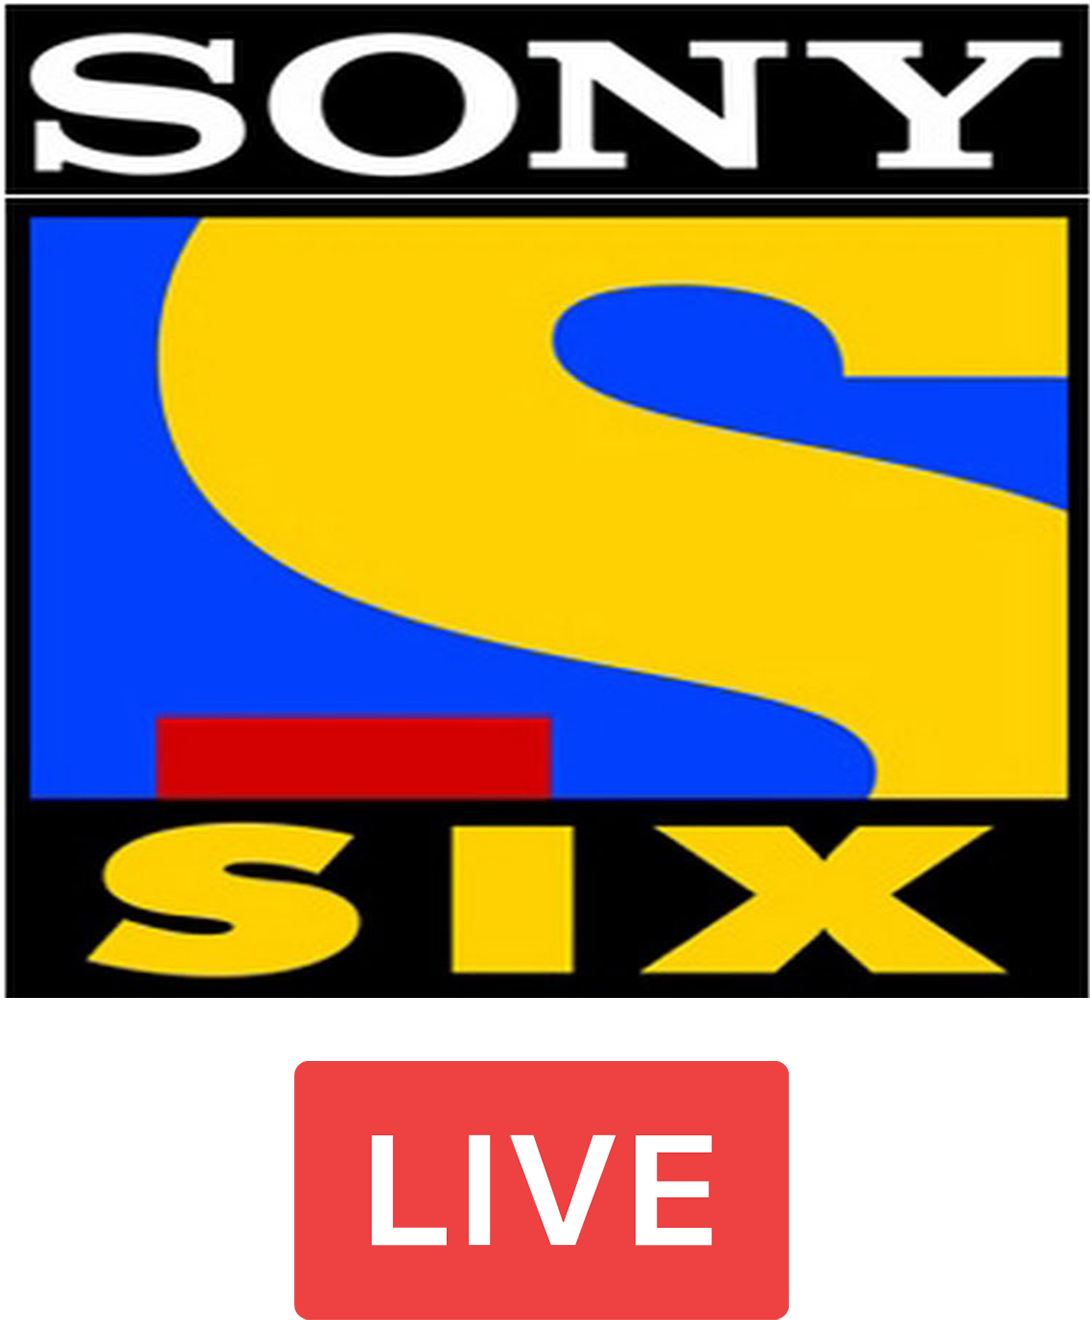 Download Sony Six Live Streaming High Quality Hd 2017 Bd Sports - Sony Six PNG Image with No Background